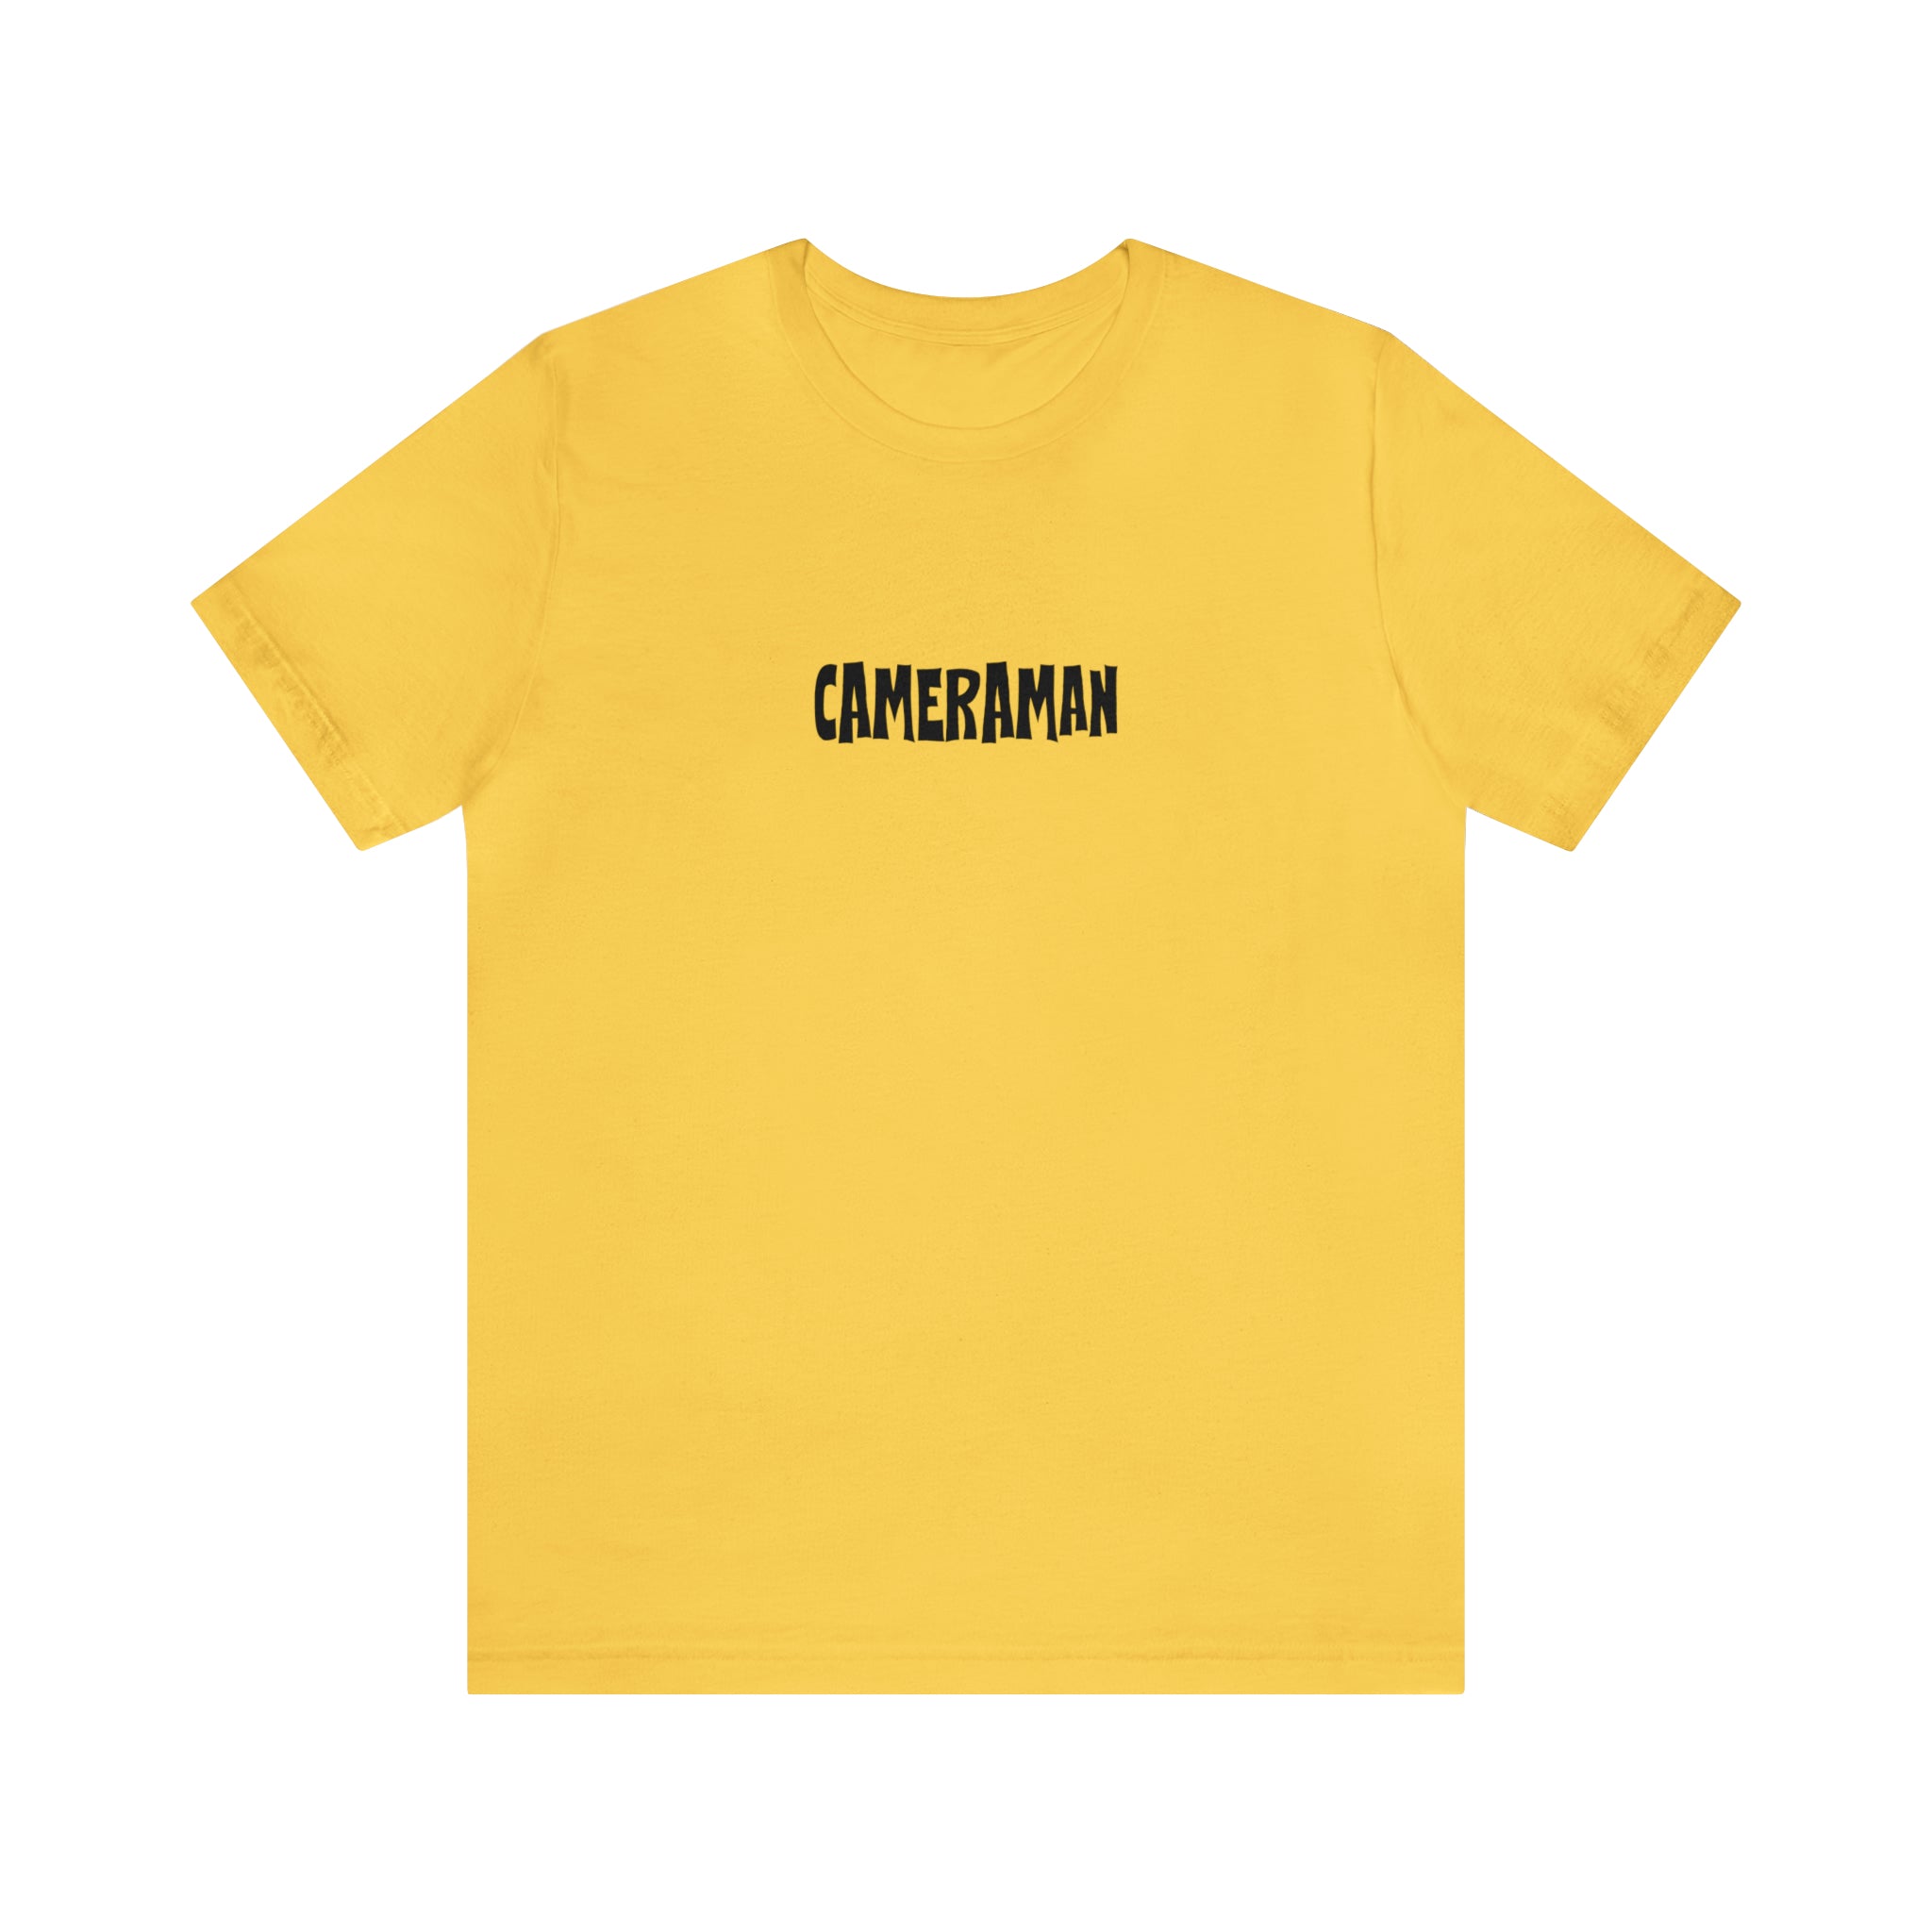 yellow tee with camerman text on front